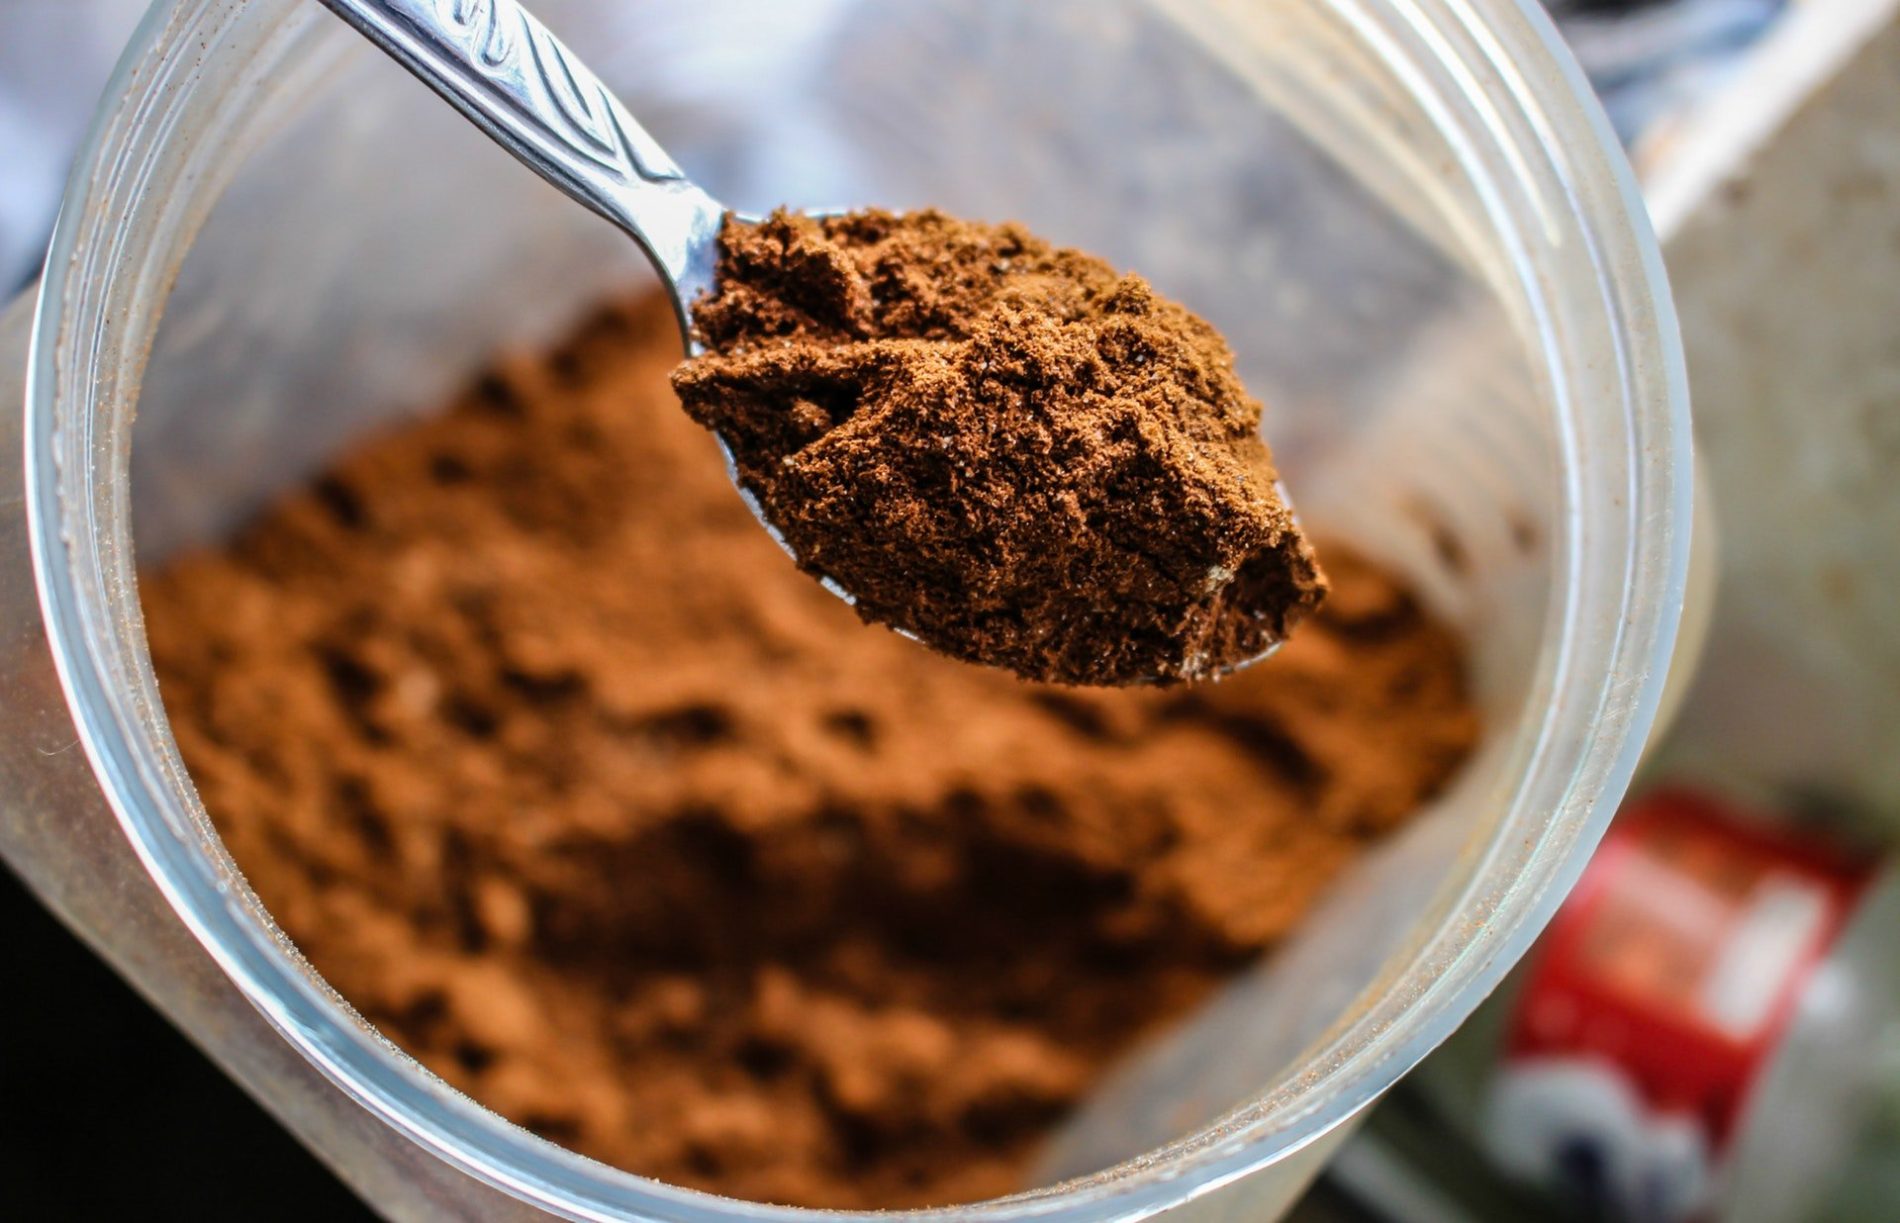 Why cacao powder needs to be part of your afternoon routine